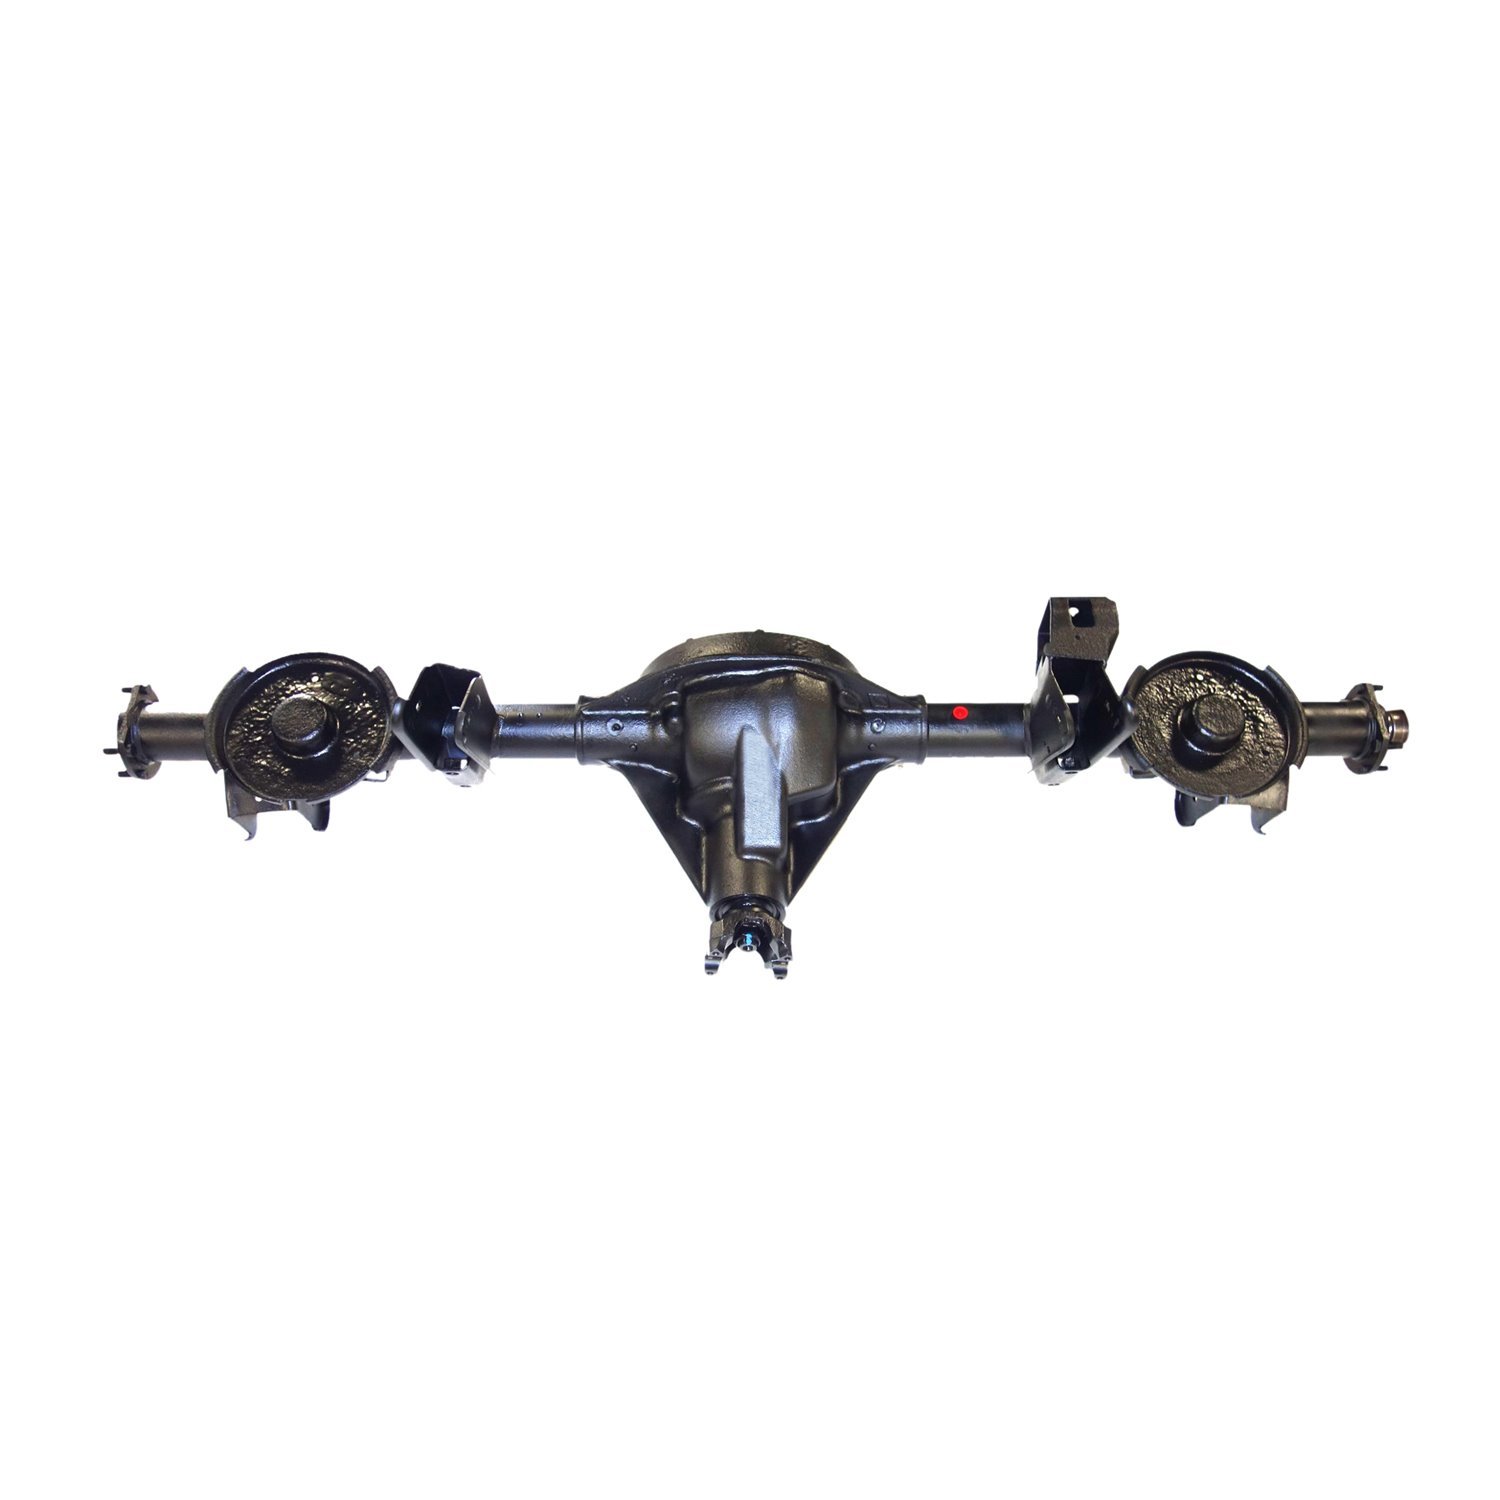 Remanufactured Complete Axle Assembly for Dana 35 87-89 Jeep Wrangler 4.11 Ratio